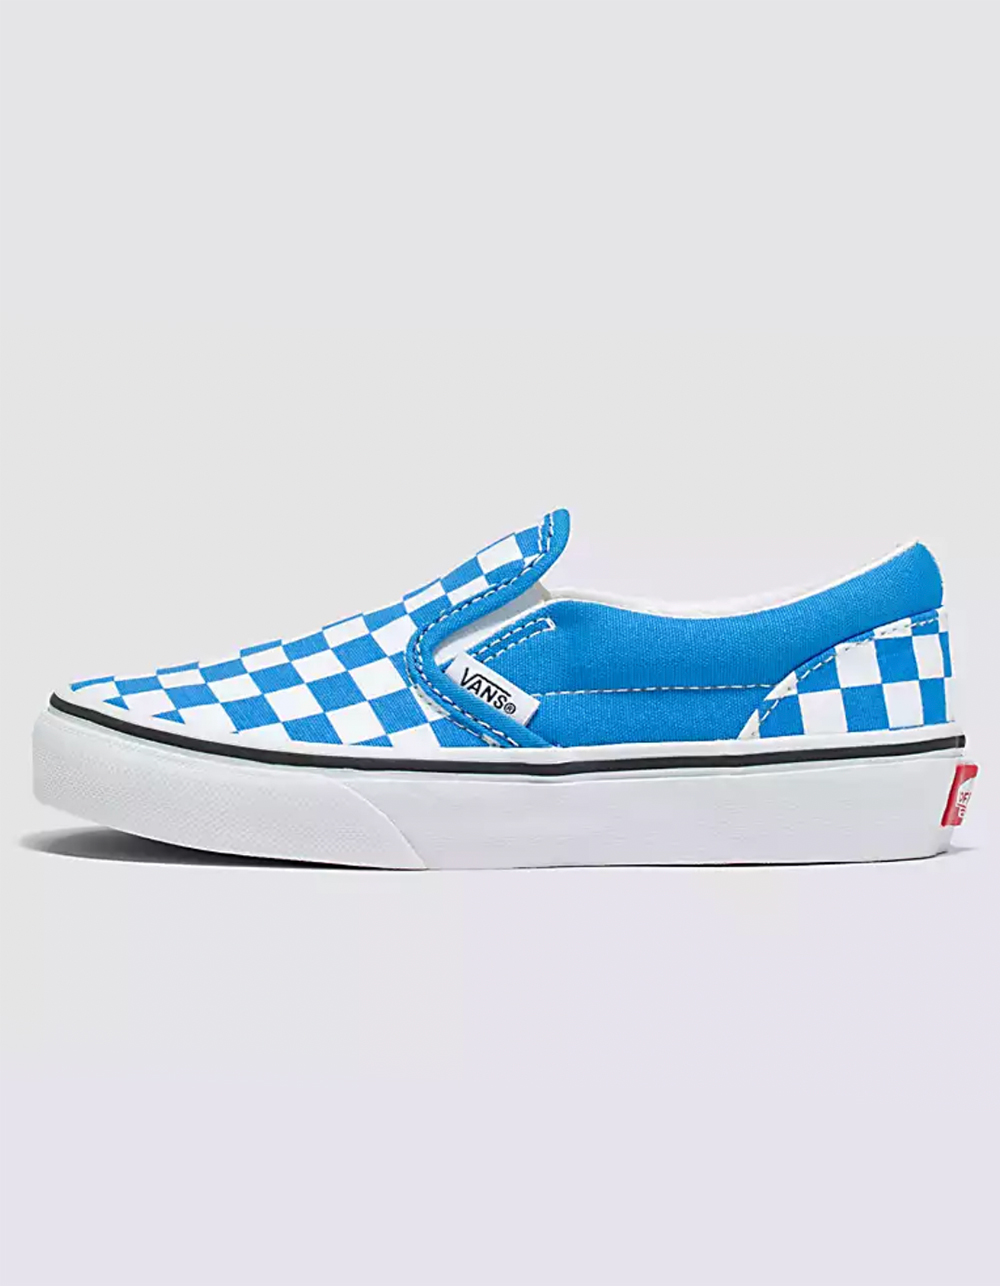 VANS Classic Slip-On Kids Checkerboard Shoes - BLUE/WHT | Tillys